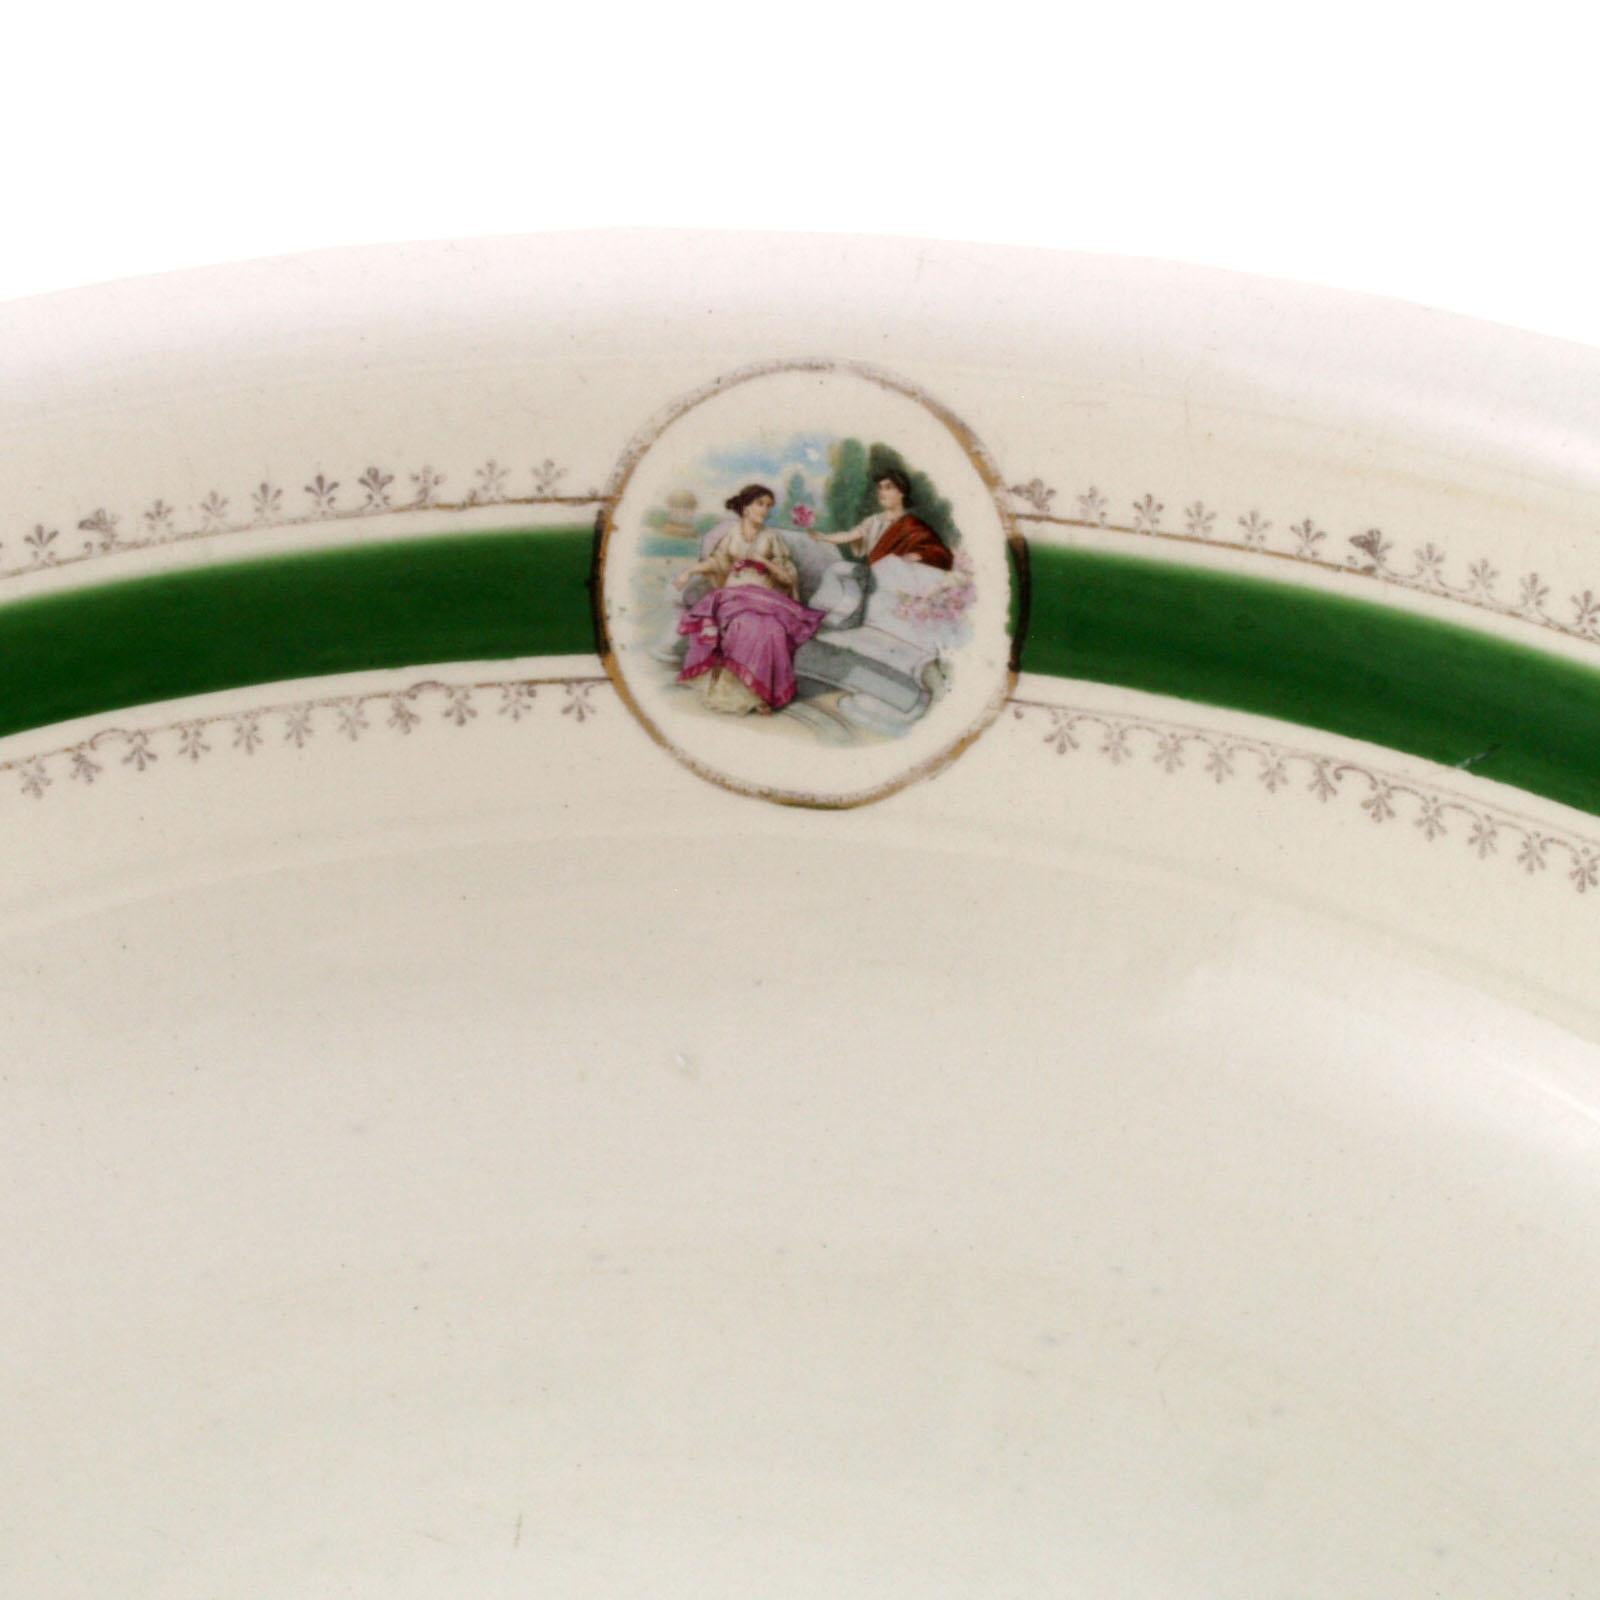 Italian 1880 circa glazed large ceramic basin by Societa Ceramiche Italiana di Laveno.
Internal profiling hand decorated in green with two decorative medallions depicting female figures of the time
The piece is intact and free from breakage,